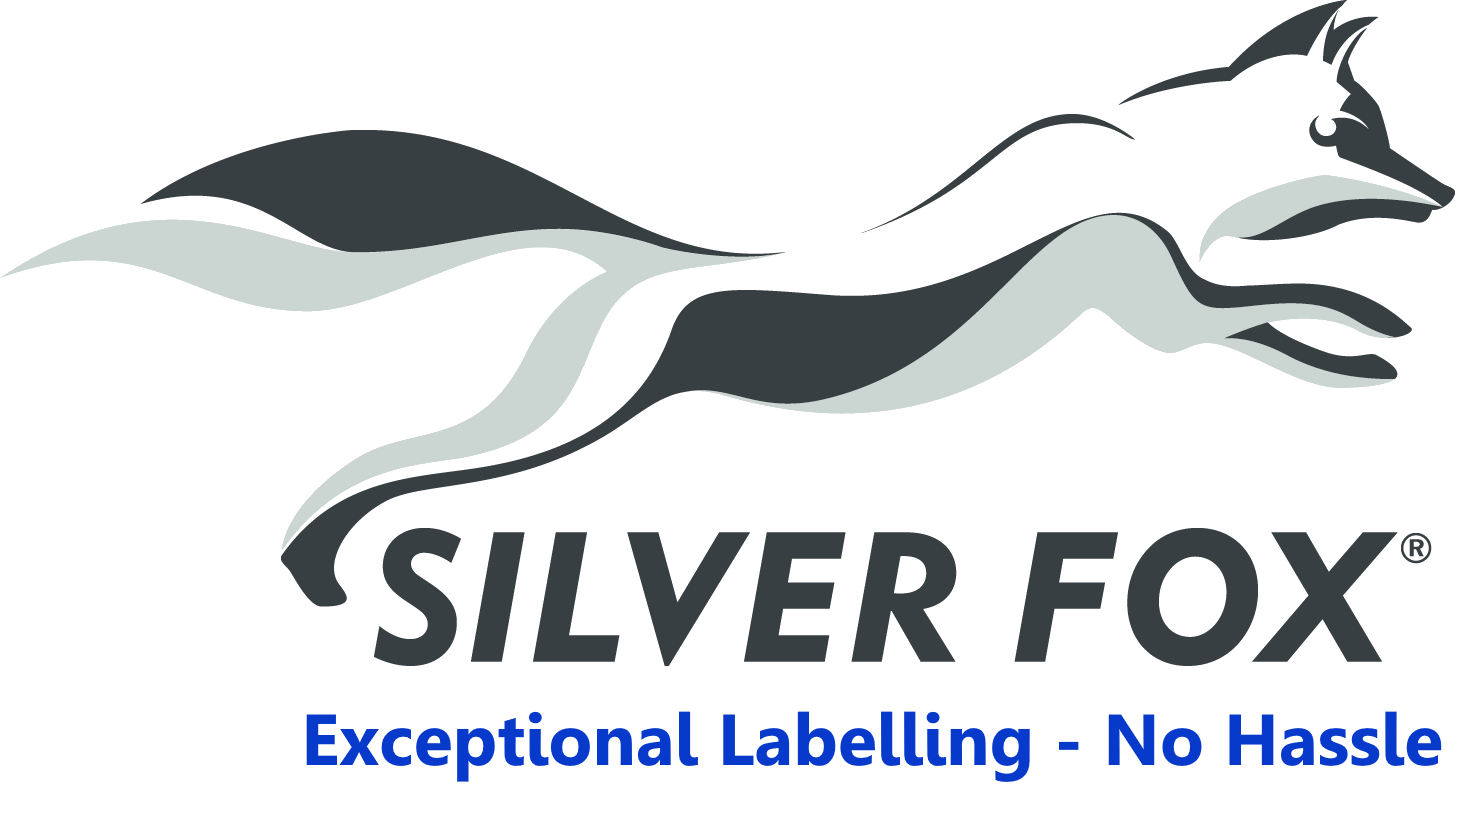 Silver Fox Logo - OEM White Labelling Solutions backed up